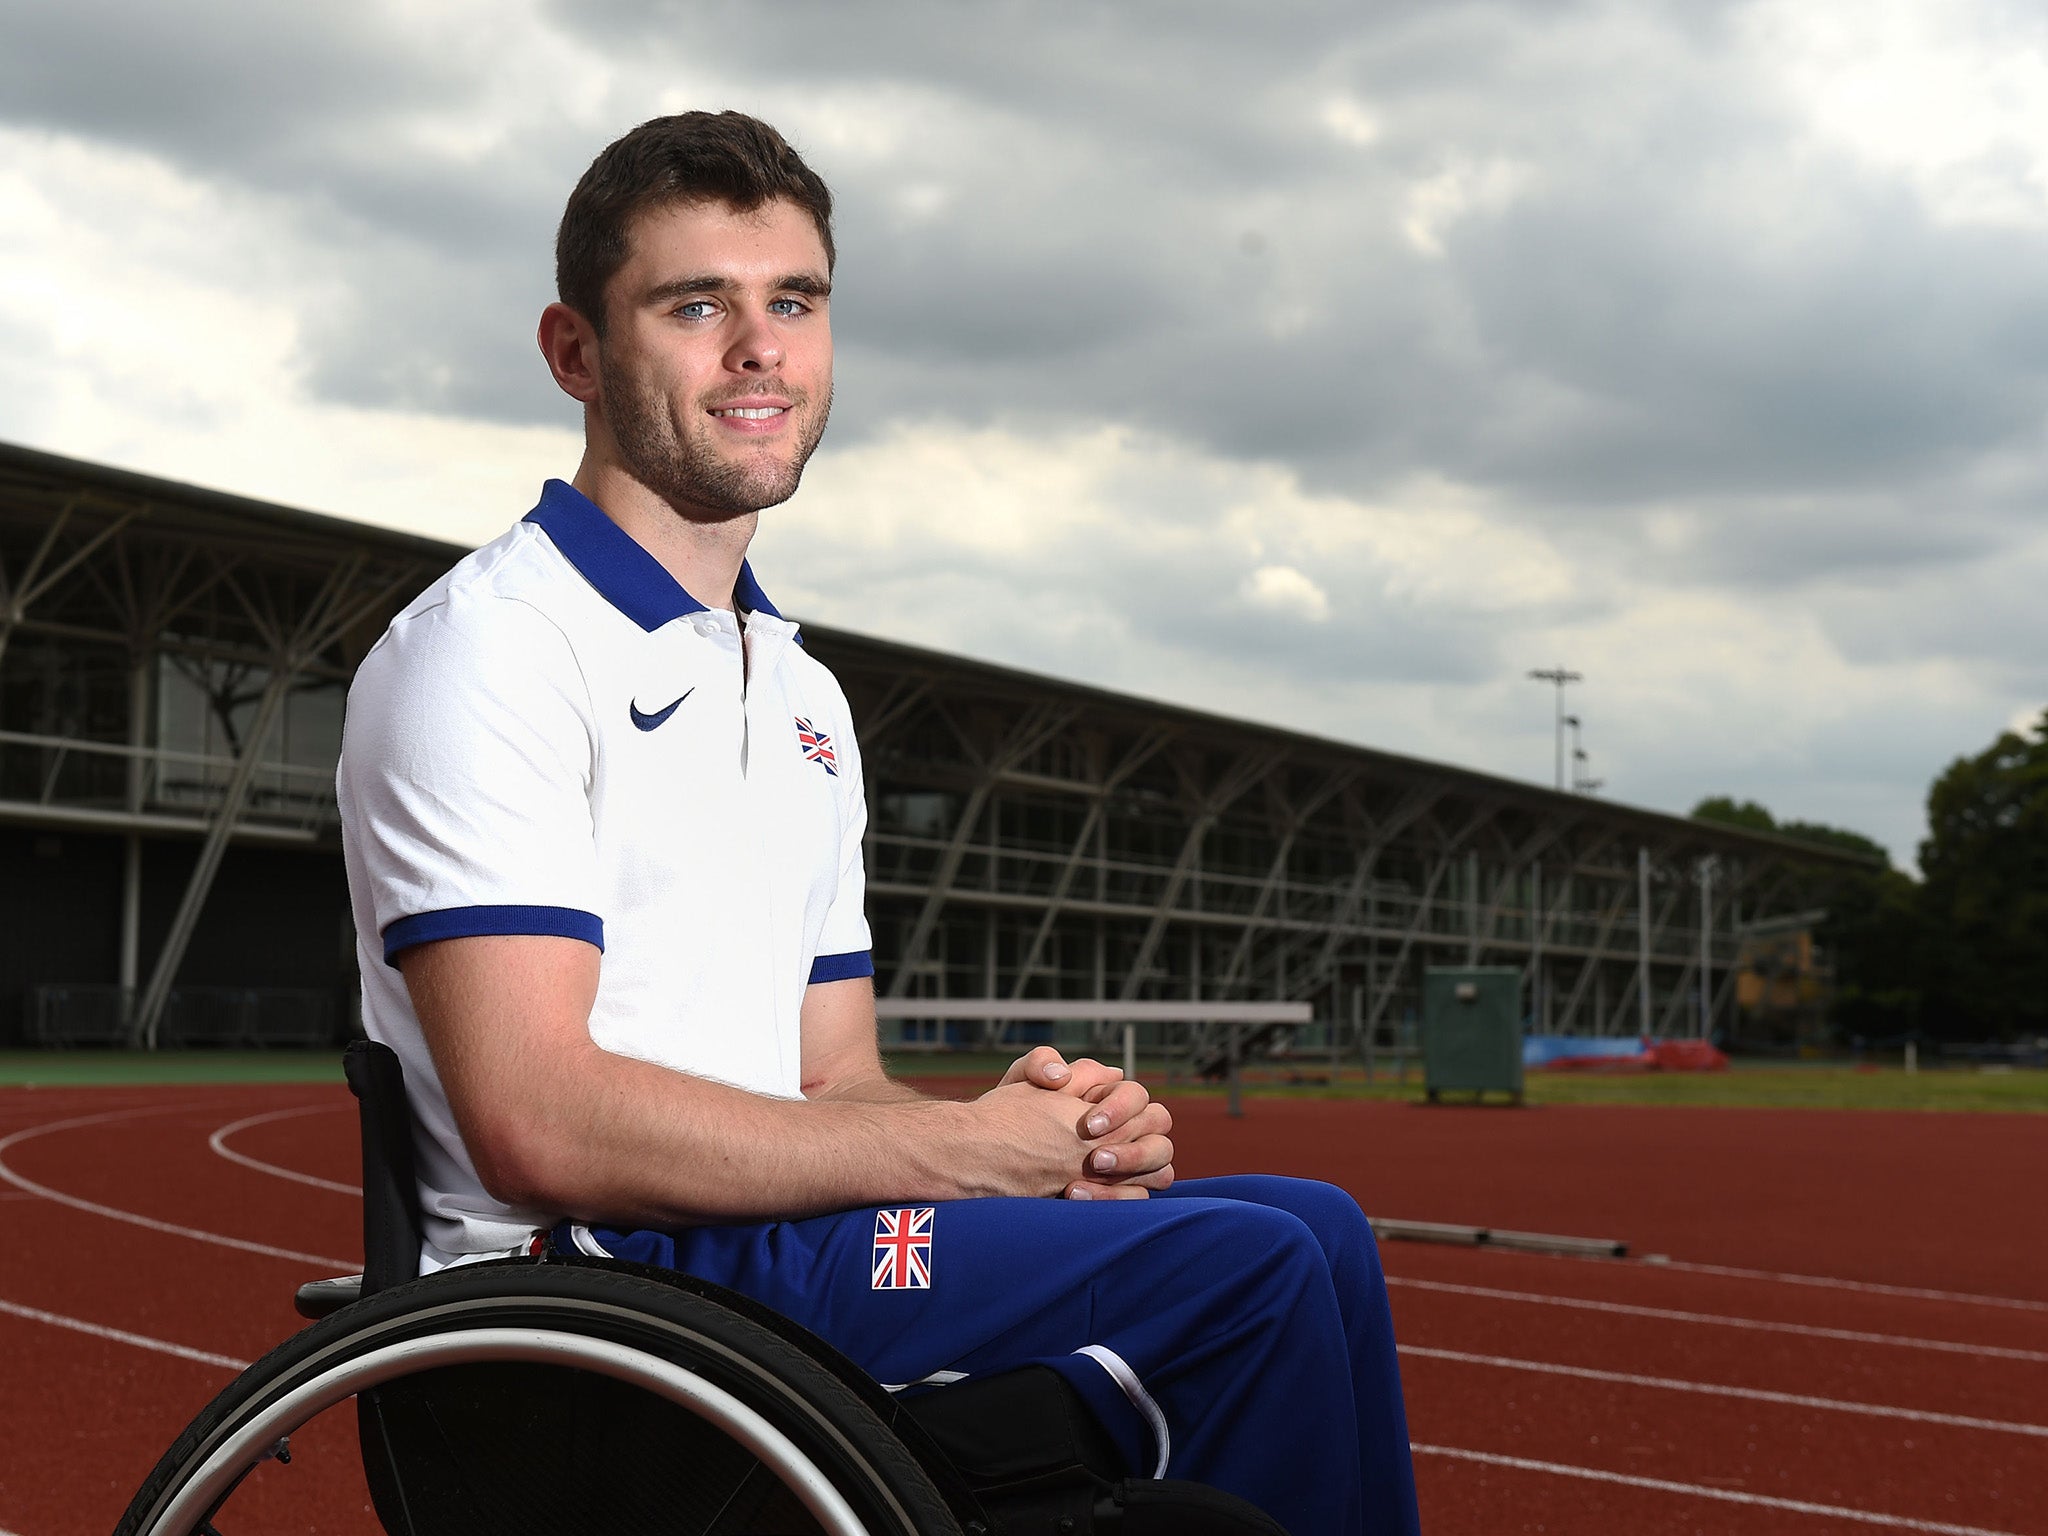 Toby Gold will be representing Great Britain in the T33 100 metres on Saturday